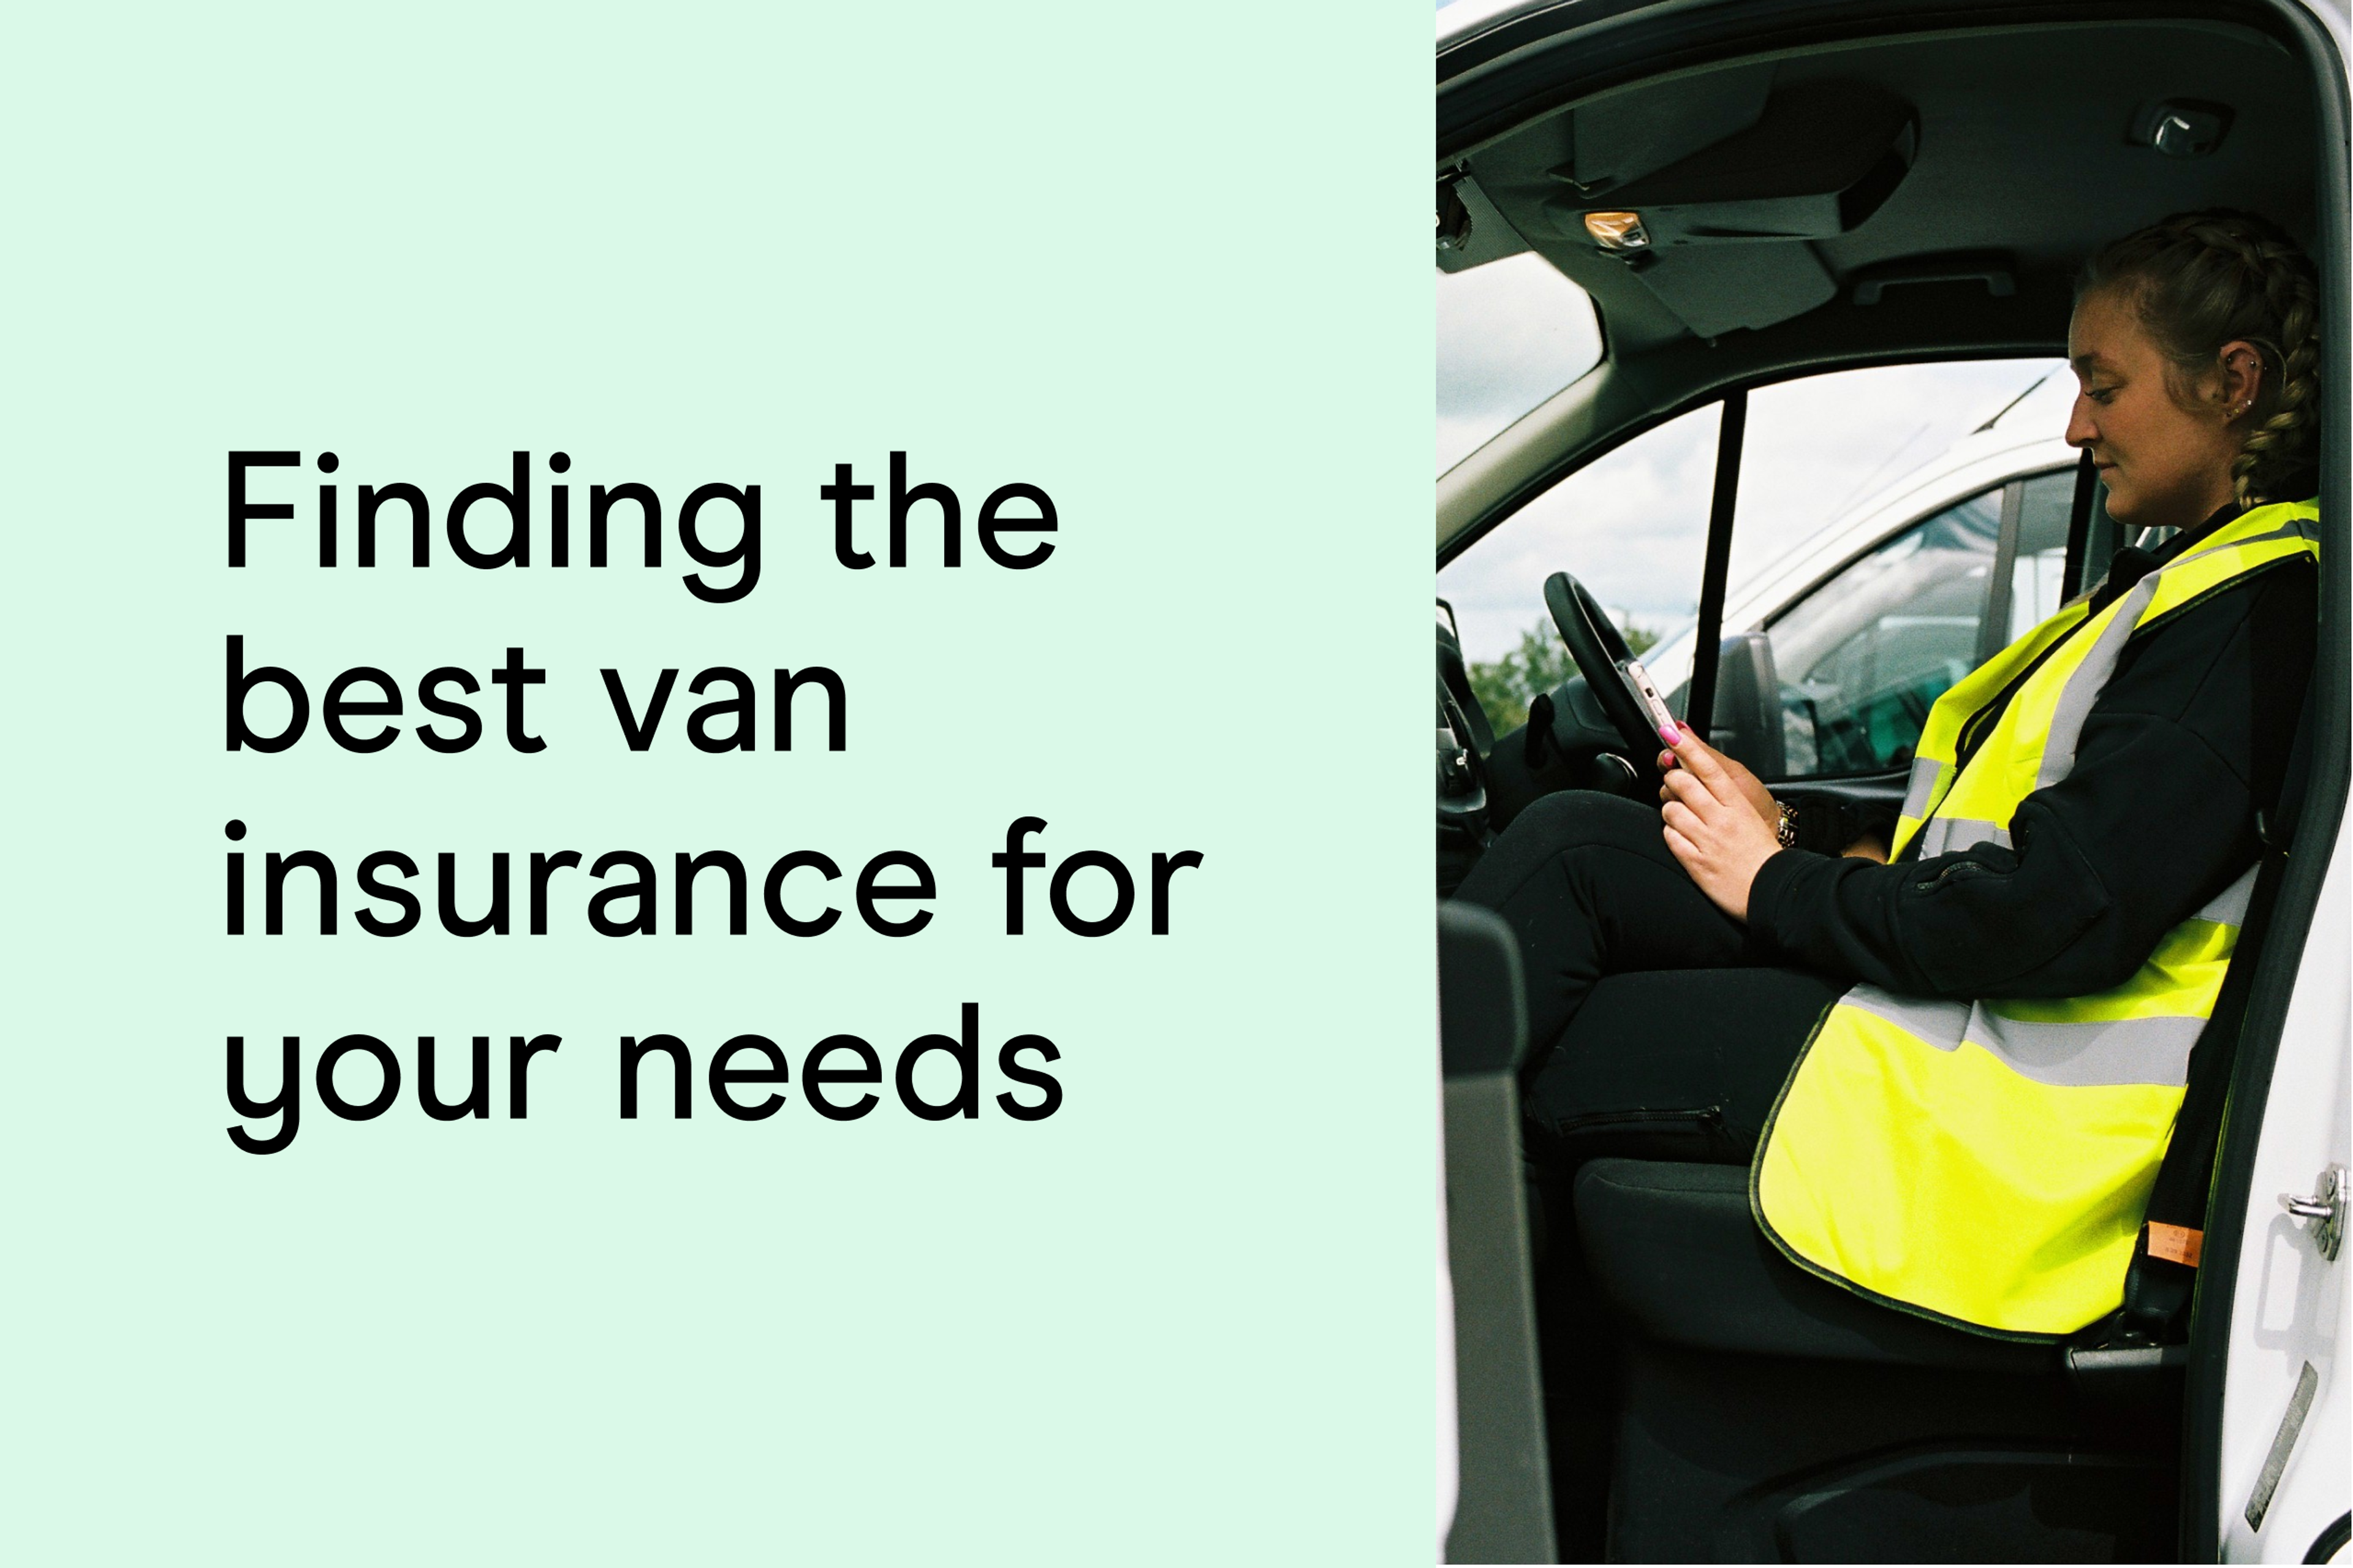 Finding the best van insurance for your needs